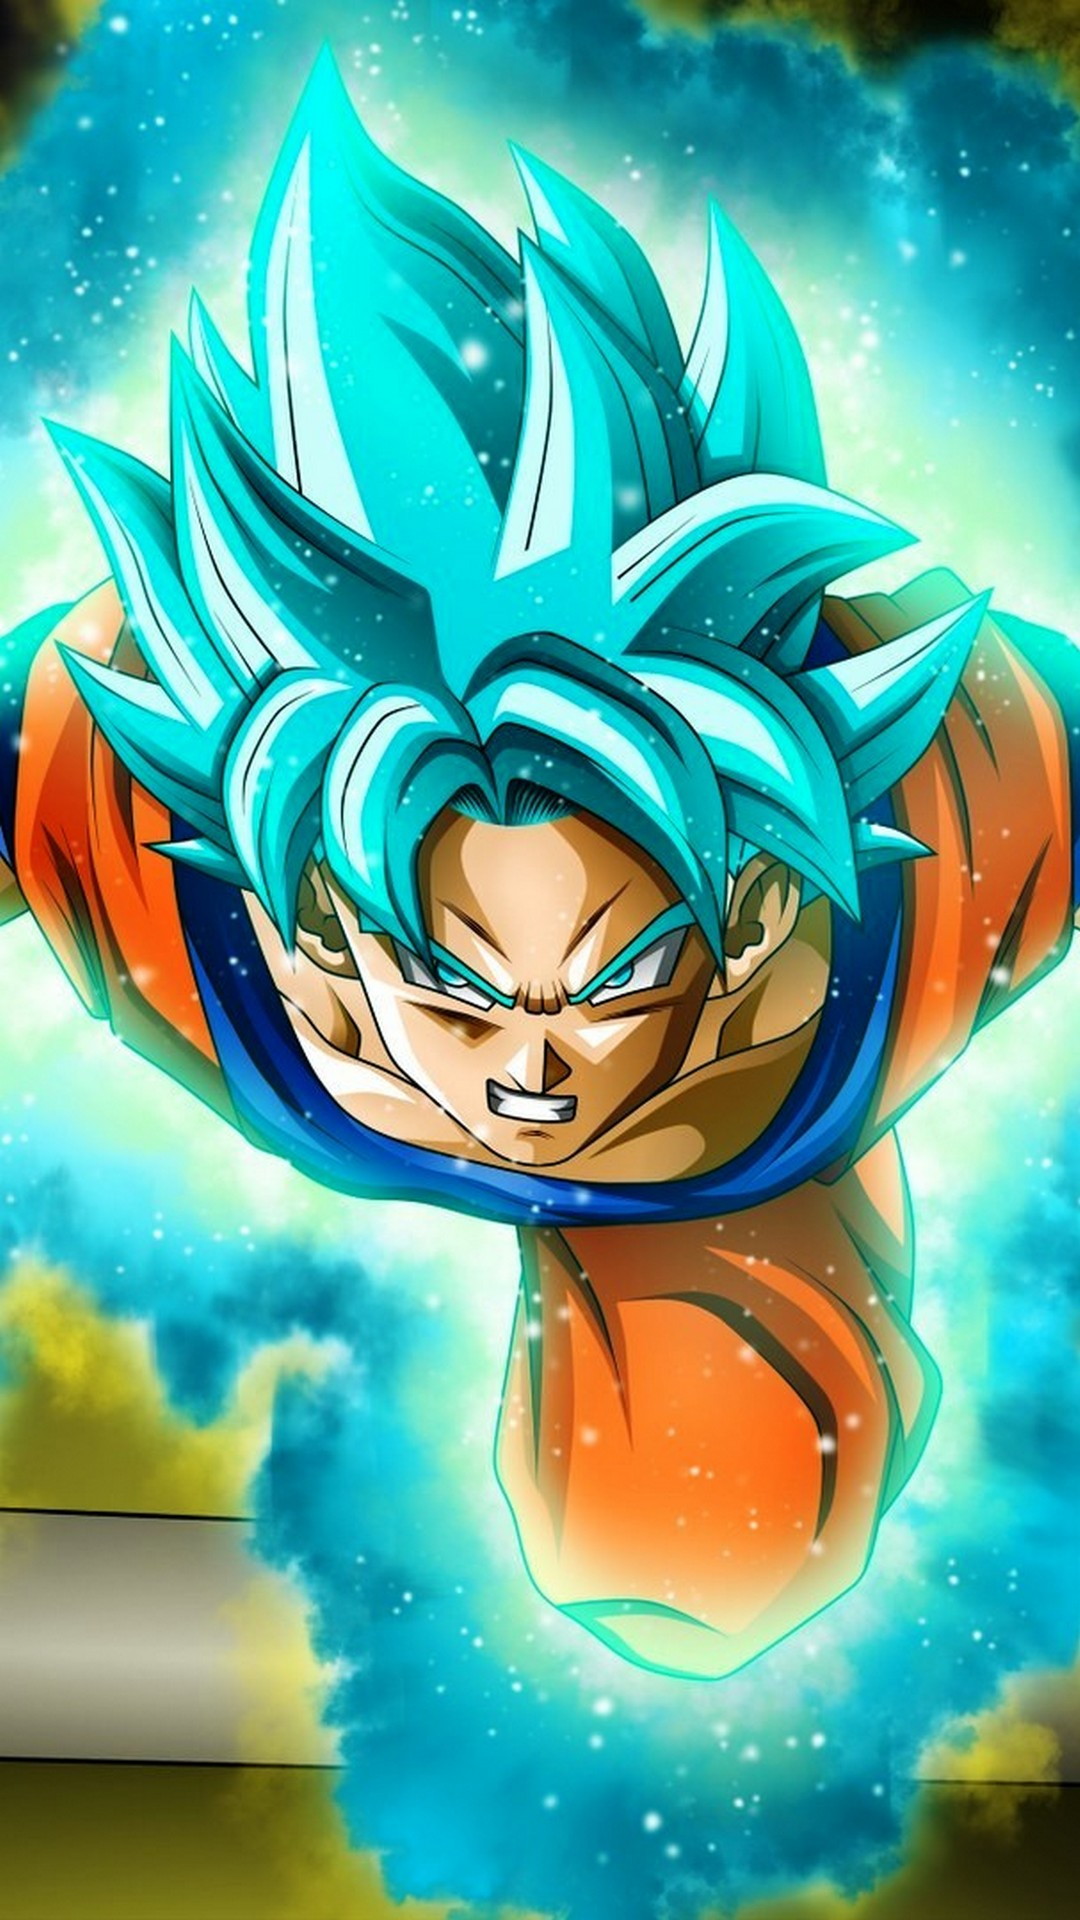 Goku SSJ Android Wallpaper with high-resolution 1080x1920 pixel. You can use and set as wallpaper for Notebook Screensavers, Mac Wallpapers, Mobile Home Screen, iPhone or Android Phones Lock Screen